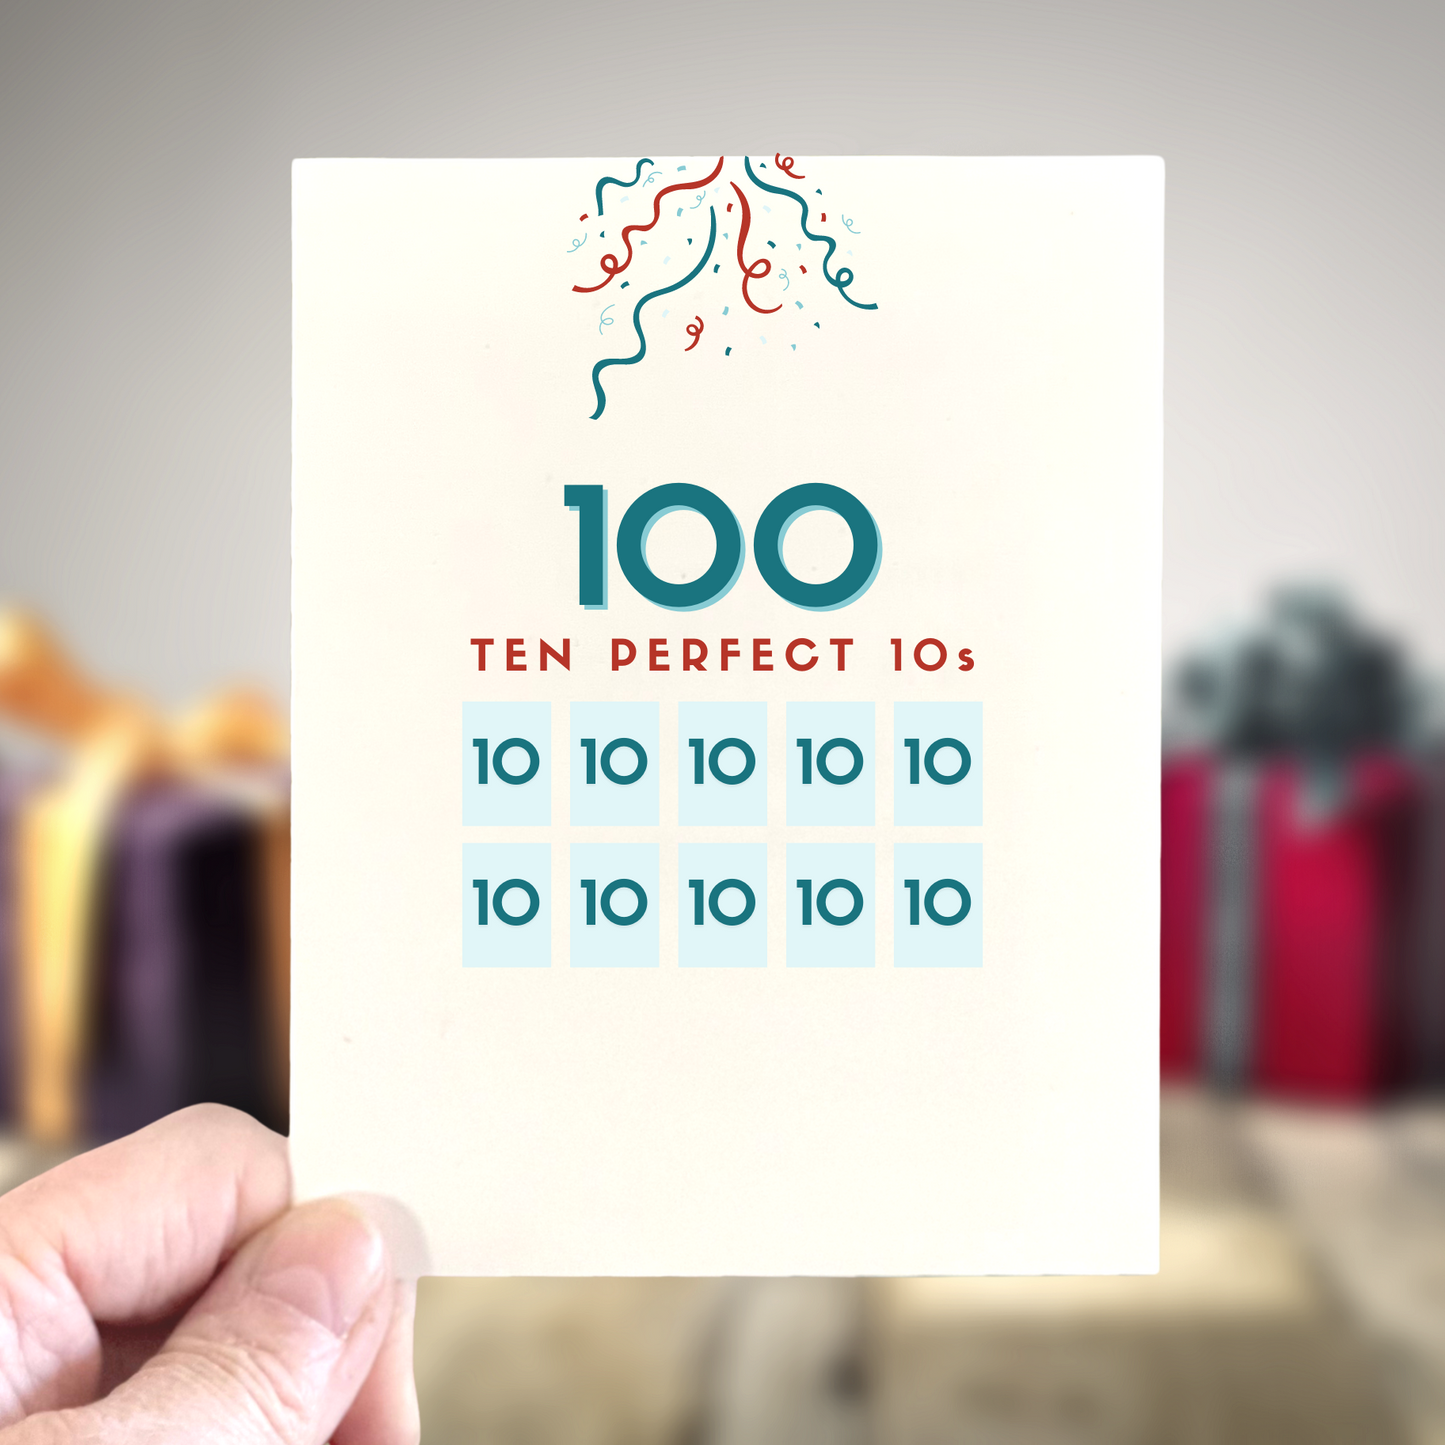 Think of 50 as five perfect 10's, available for 60, 70, 80, 90 or 100th birthday